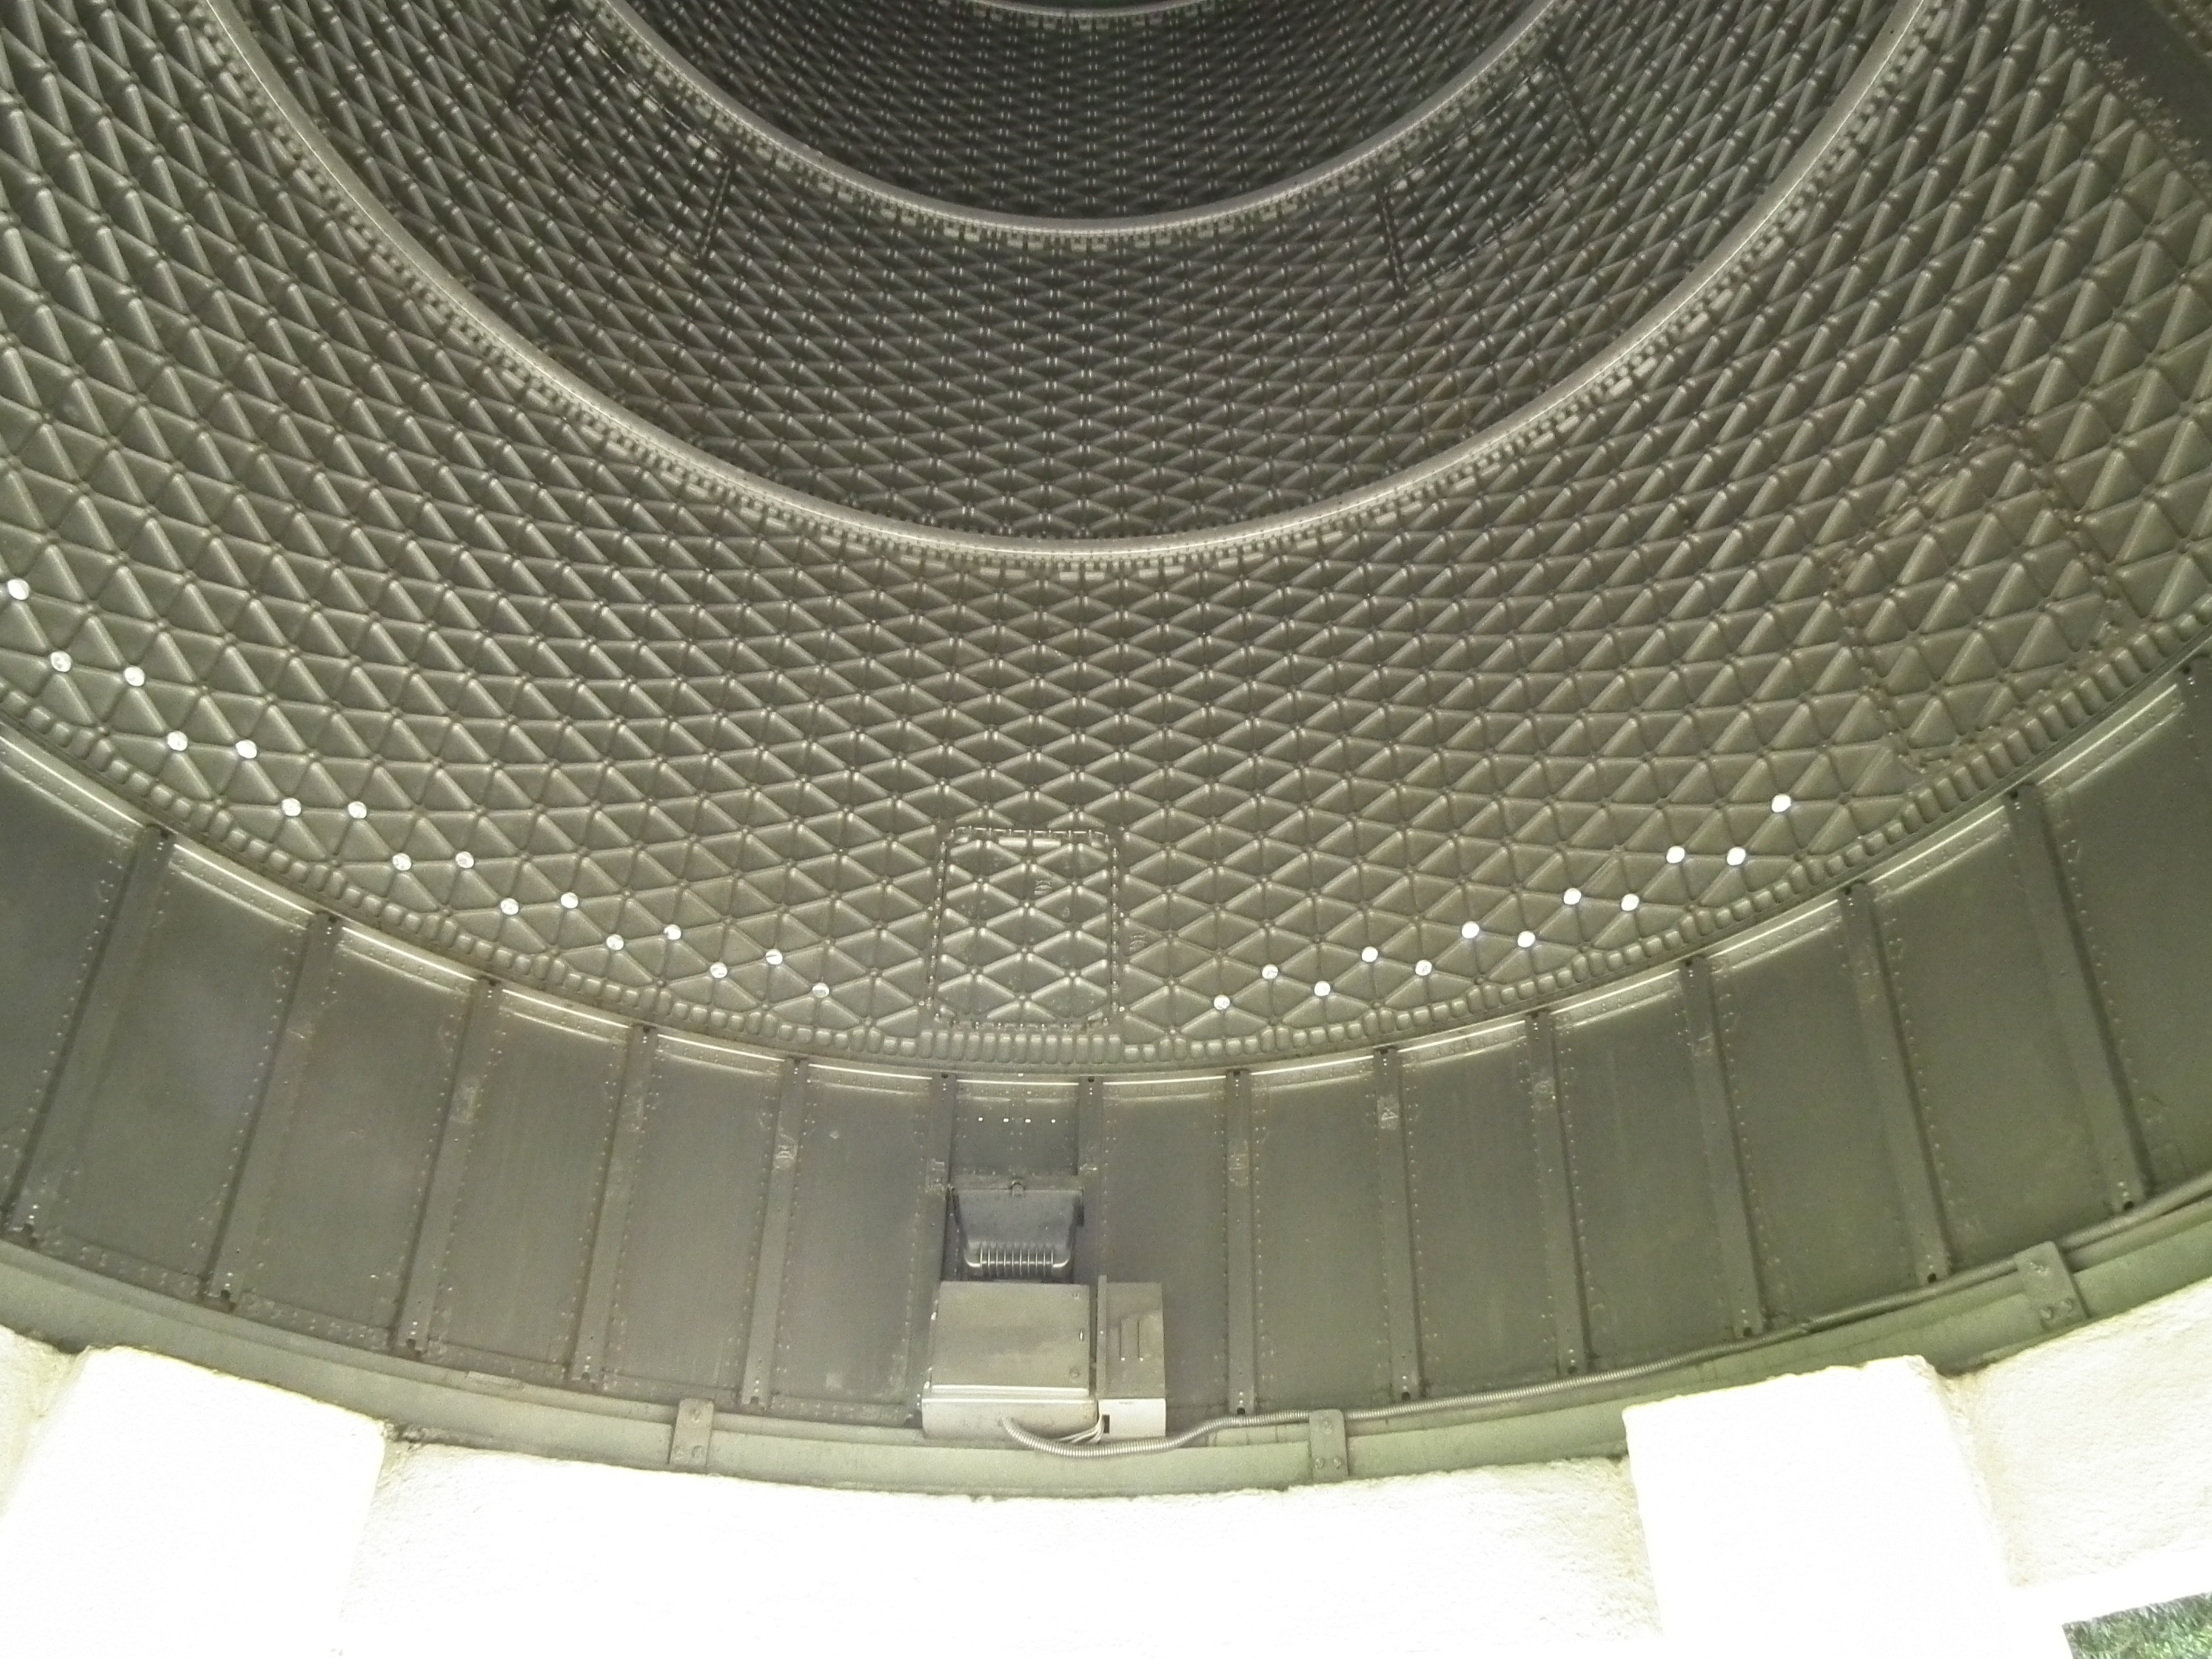 Full size heat shield of PSLV 7846